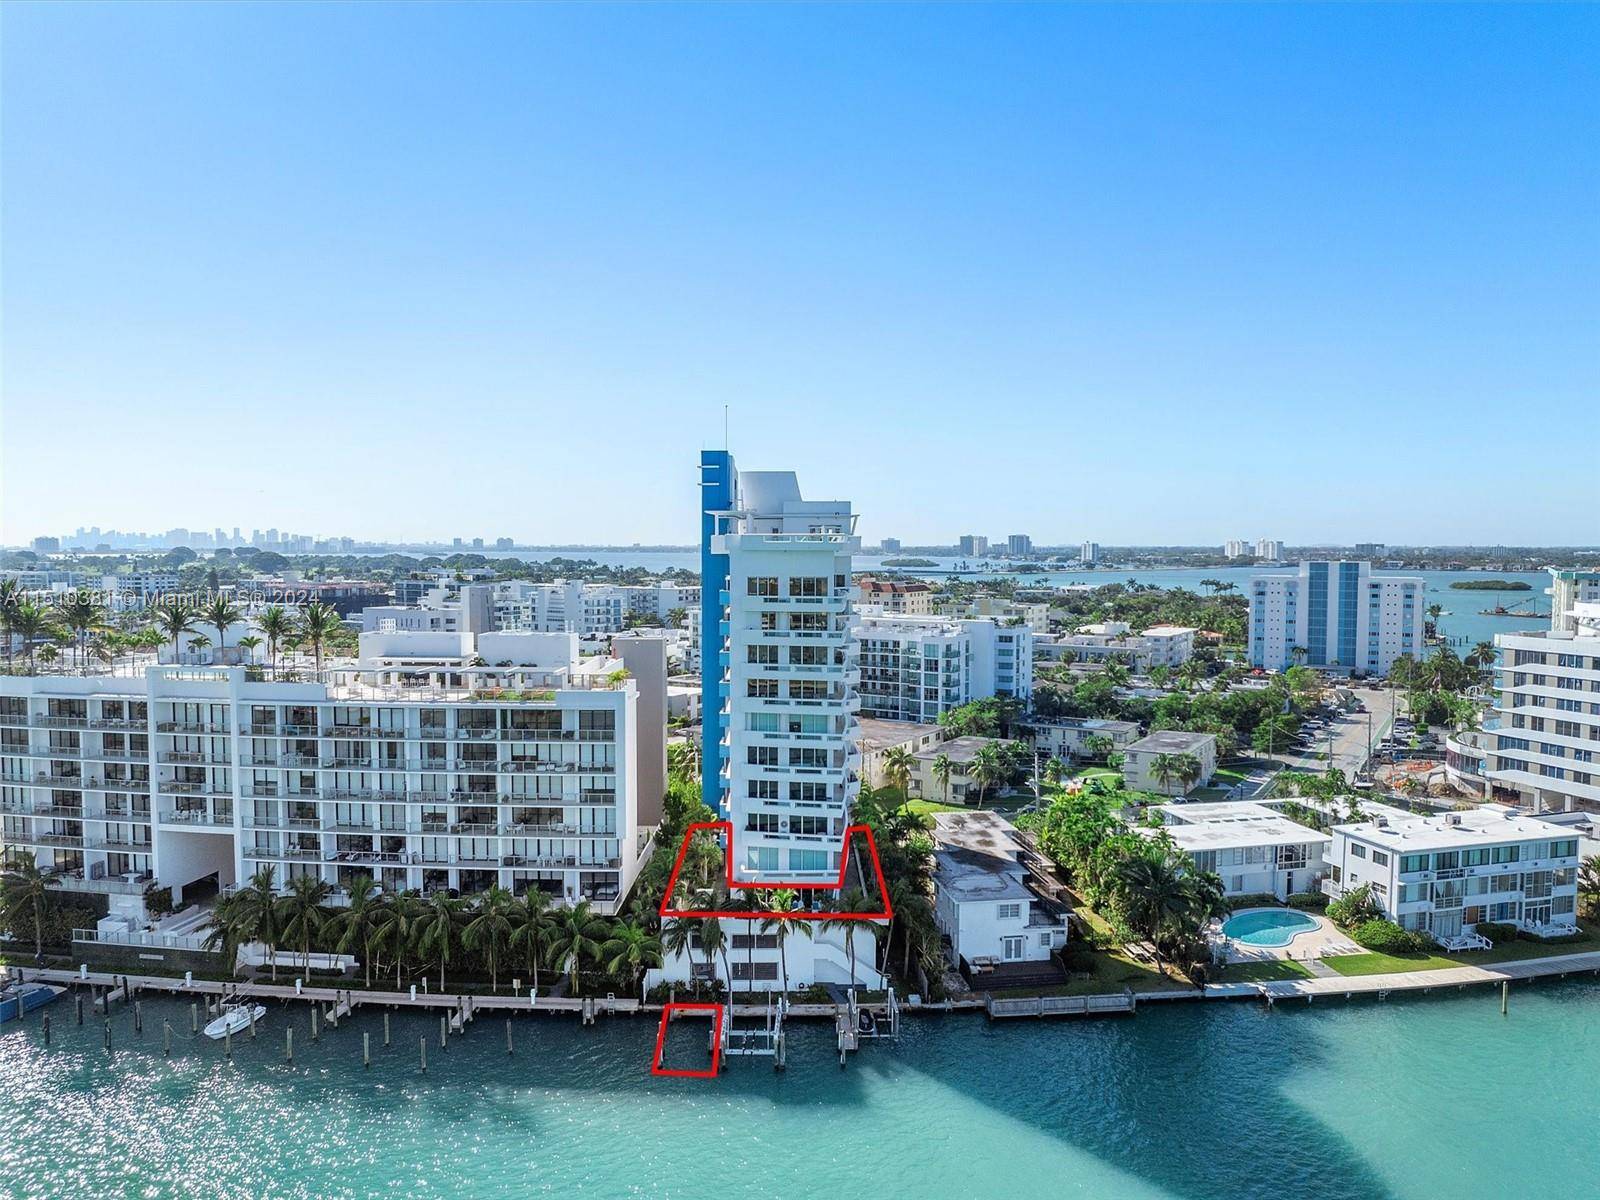 Experience luxurious waterfront living at its finest.